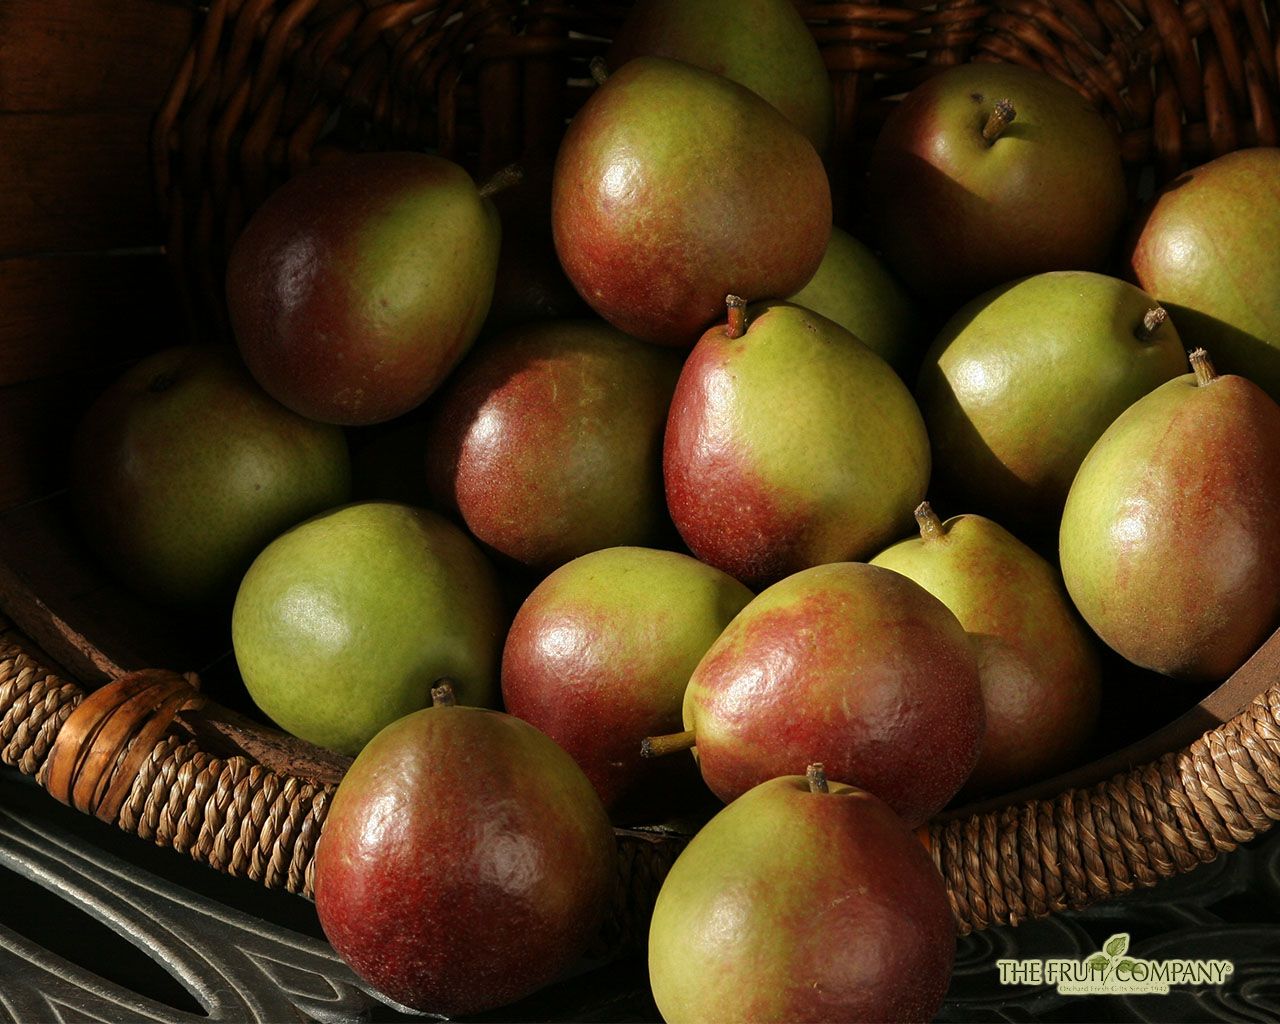 Wallpaper Wednesday: Seckel Pears. The Fruit Company® Blog